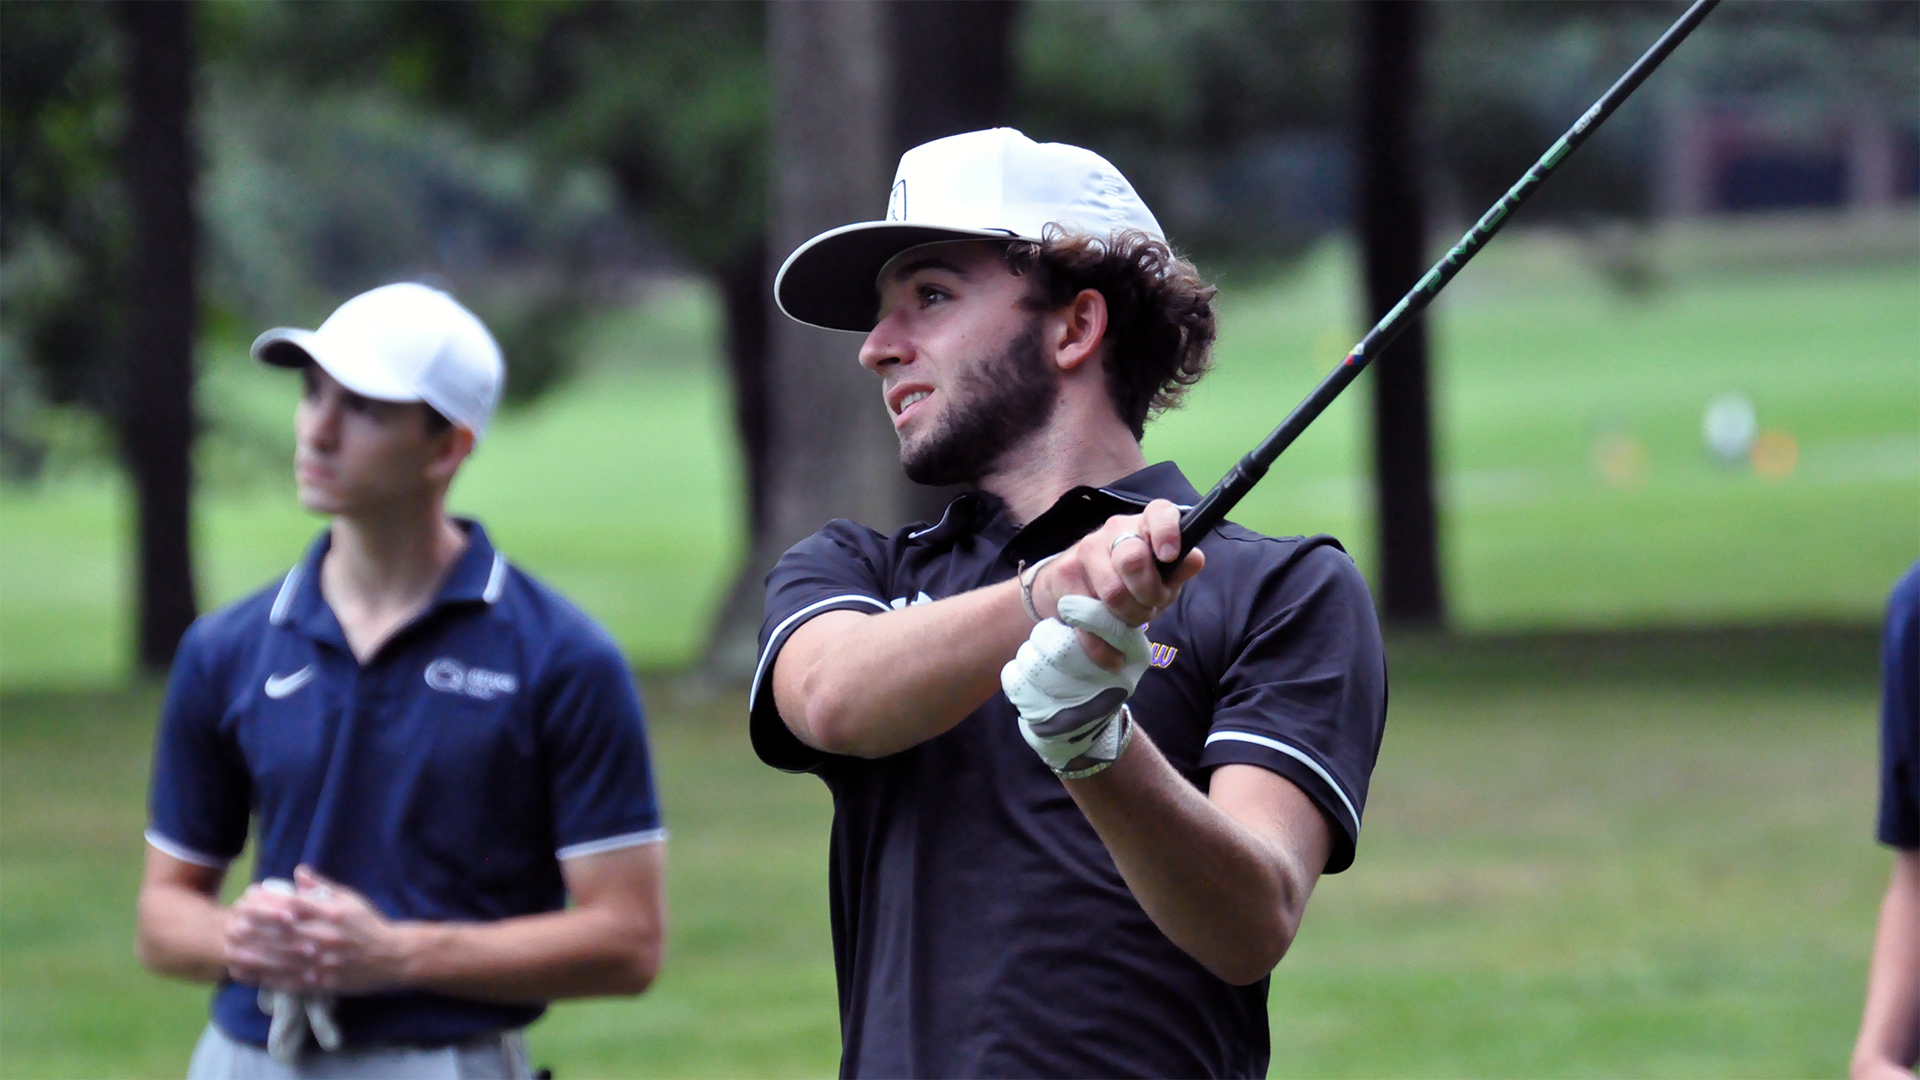 Logan Smith watches his shot. Photo courtesy of Penn State Altoona Sports Information.